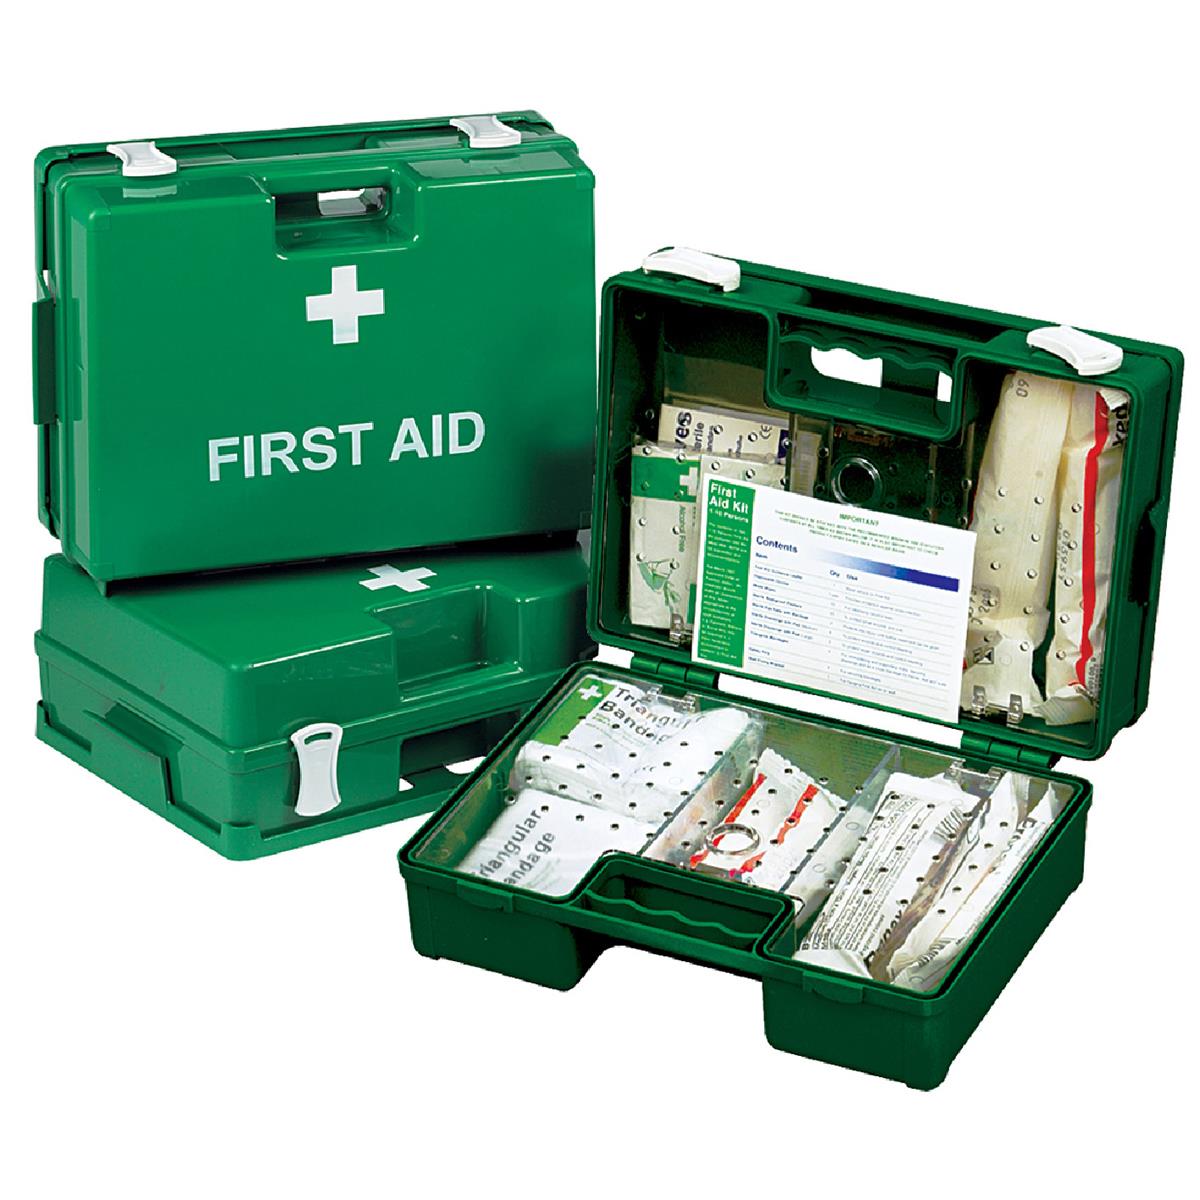 First Aid Kit 1-20 People - HNH103 